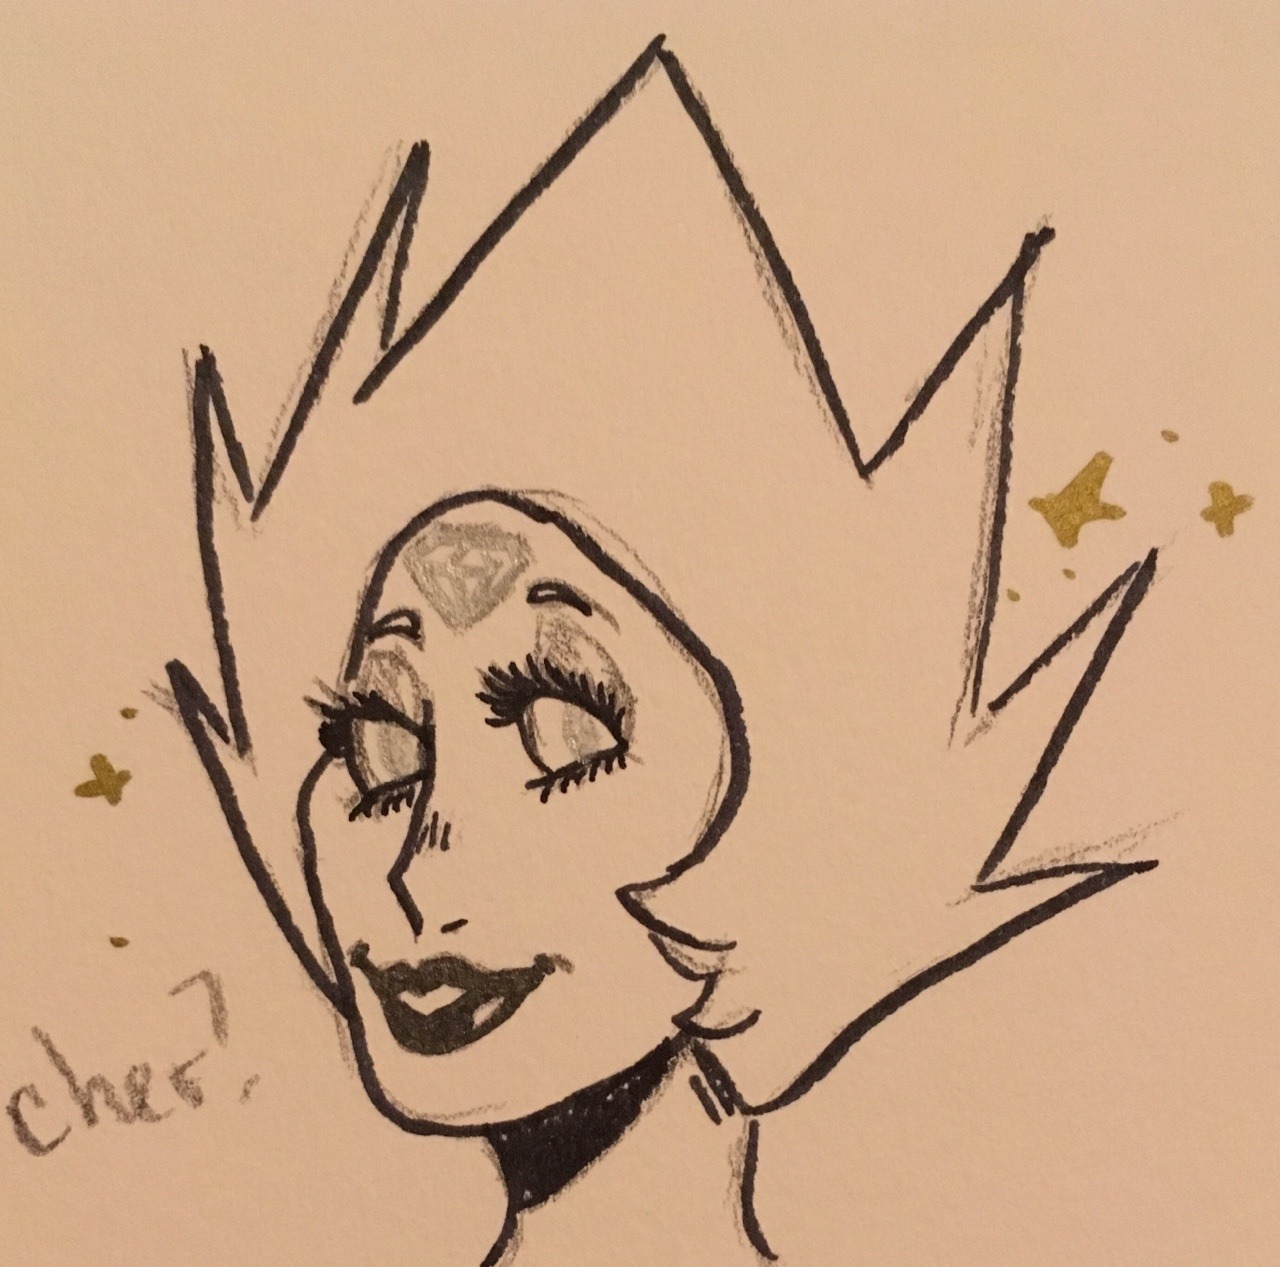 Is white diamond really Cher? Why am I the only one with the REAL questions